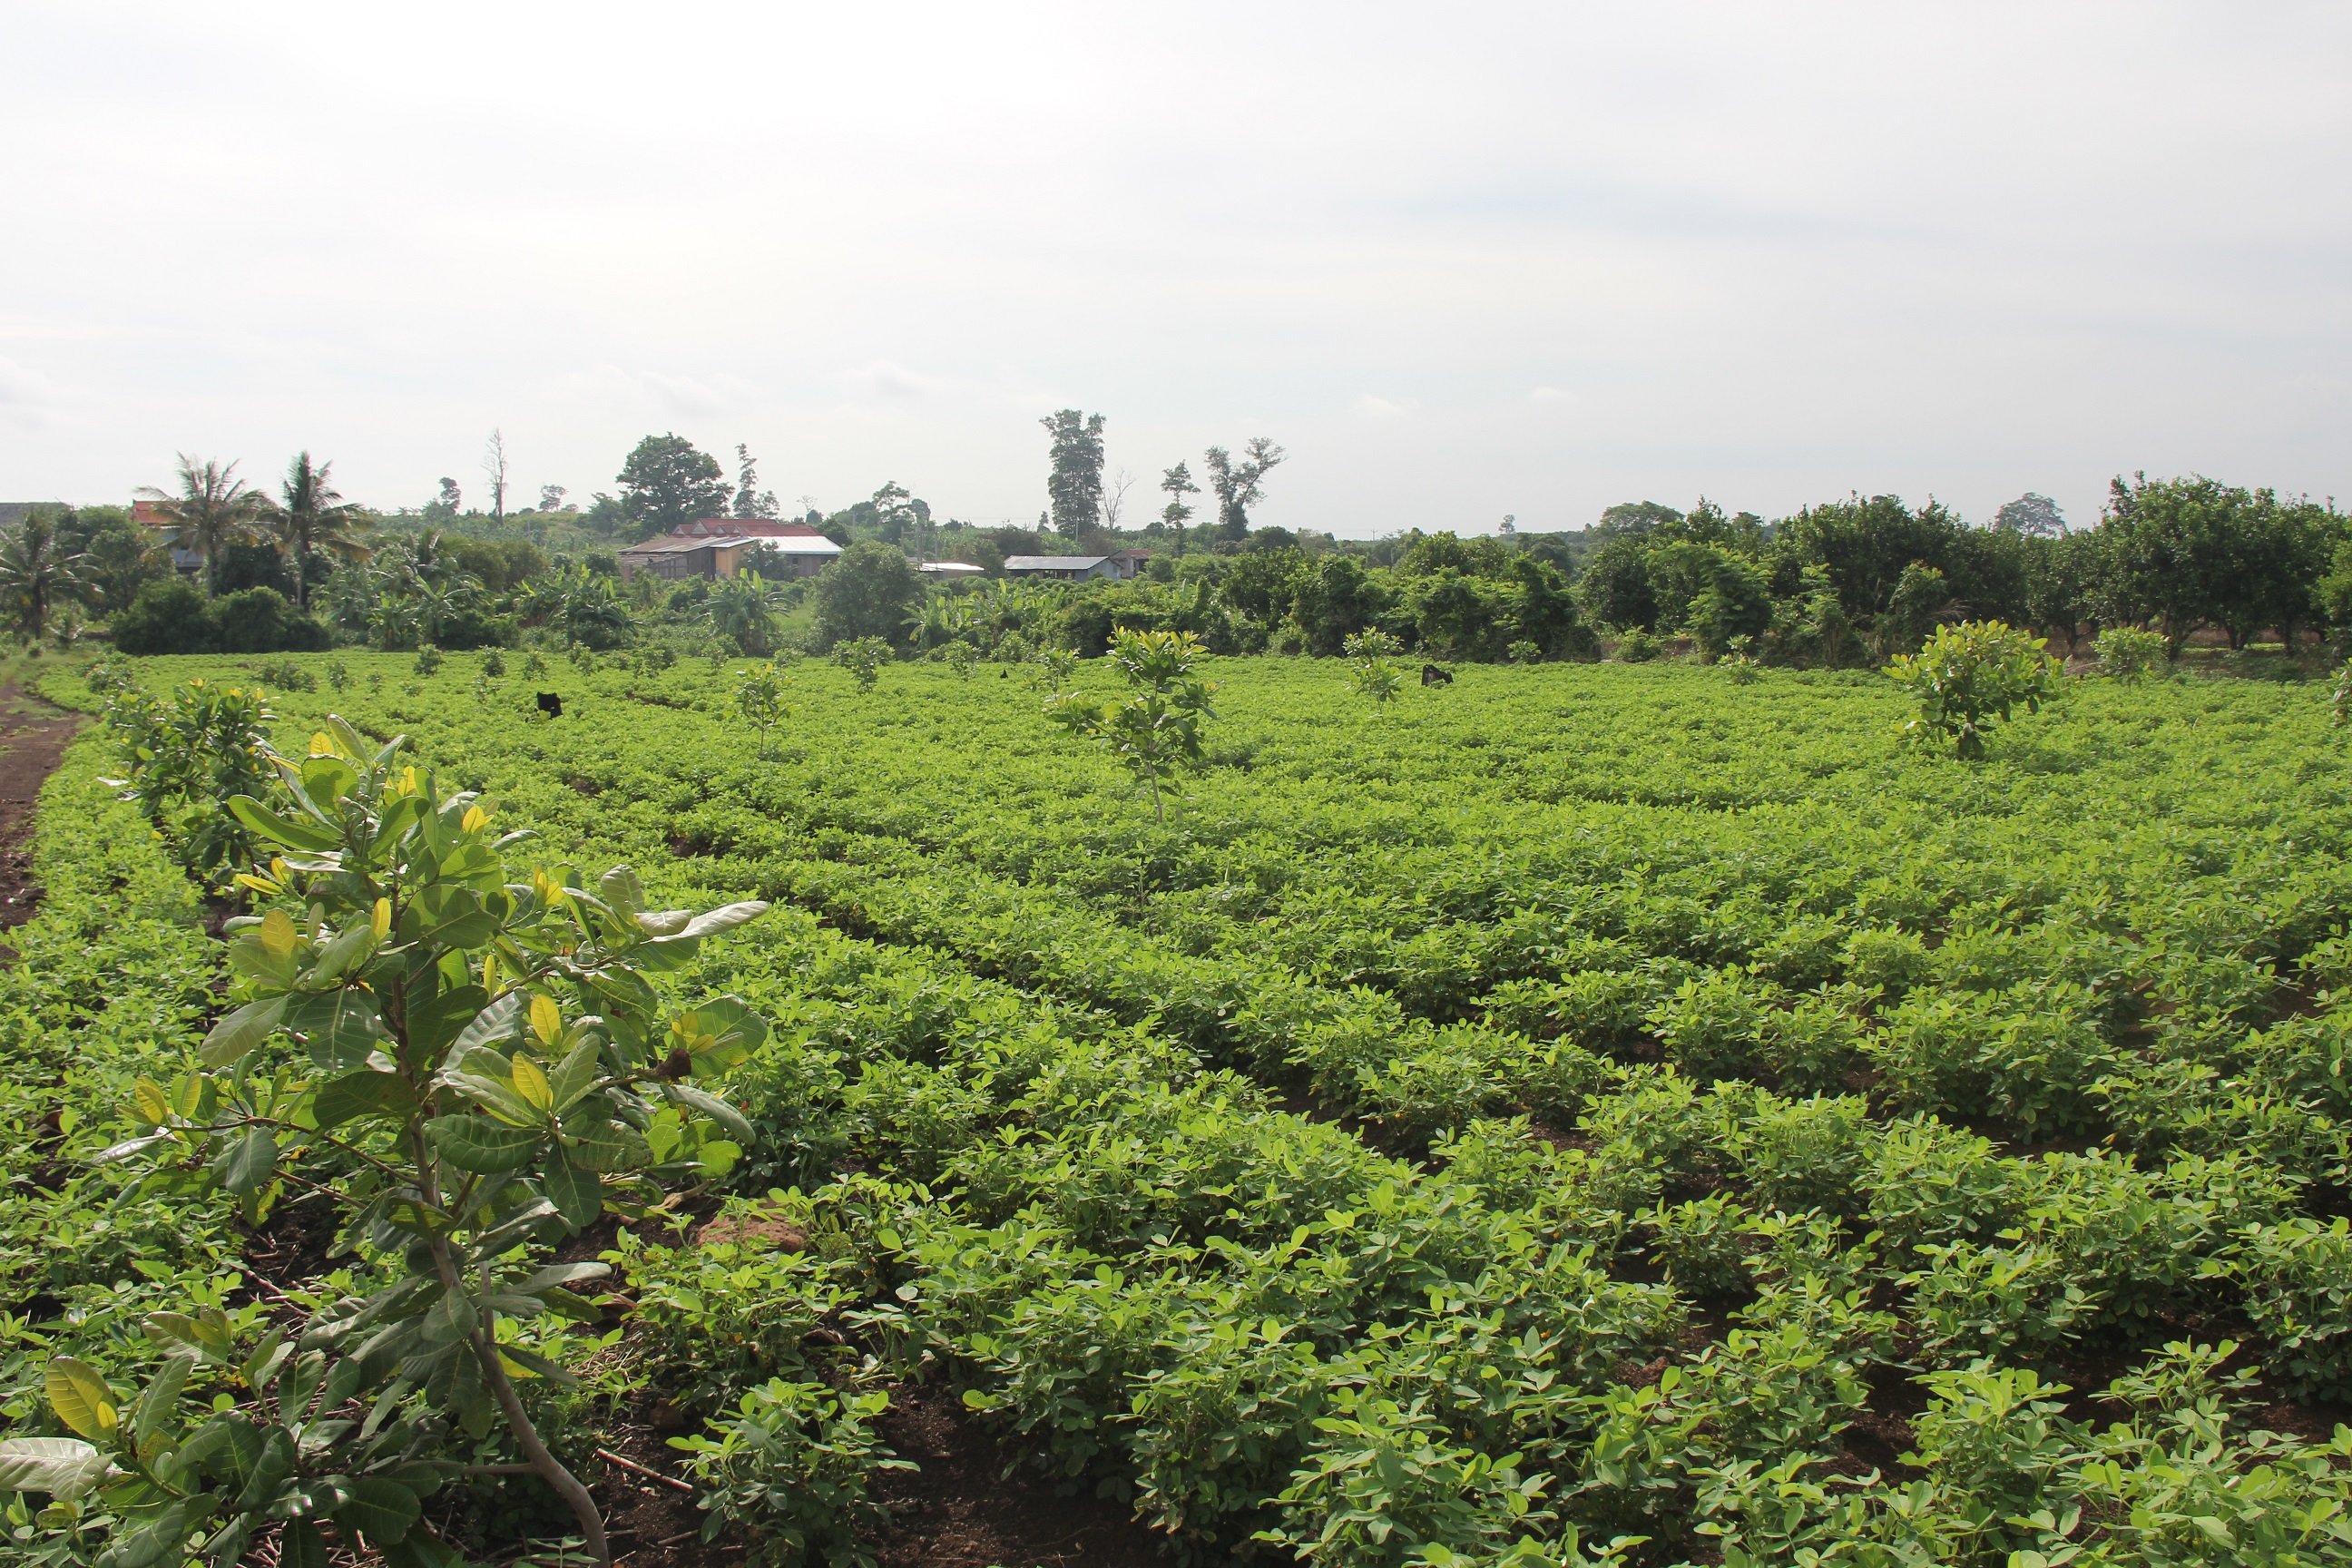 Intercropping of cashew nut trees with peanut on the uplands of  Tbaeng Mean Chey District